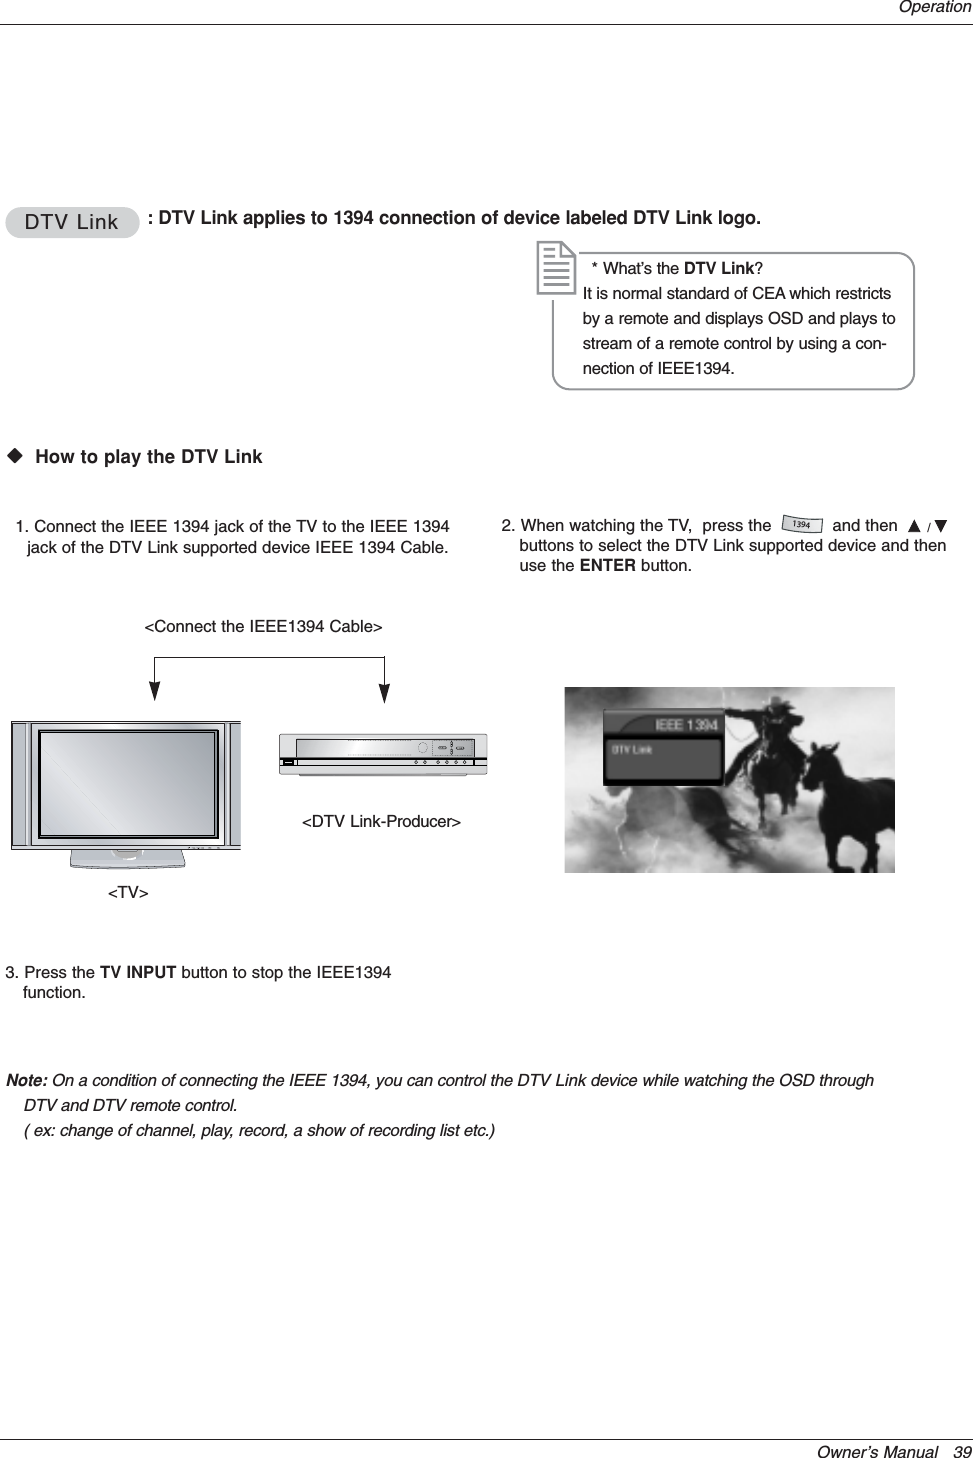 Owner’s Manual   39OperationDTV LinkDTV Link : DTV Link applies to 1394 connection of device labeled DTV Link logo.WWVHow to play the DTV Link&lt;DTV Link-Producer&gt;1. Connect the IEEE 1394 jack of the TV to the IEEE 1394jack of the DTV Link supported device IEEE 1394 Cable.* What’s the DTV Link?It is normal standard of CEA which restrictsby a remote and displays OSD and plays tostream of a remote control by using a con-nection of IEEE1394.&lt;Connect the IEEE1394 Cable&gt;2. When watching the TV,  press the            and then  D/Ebuttons to select the DTV Link supported device and thenuse the ENTER button.1394&lt;TV&gt;3. Press the TV INPUT button to stop the IEEE1394function.Note: On a condition of connecting the IEEE 1394, you can control the DTV Link device while watching the OSD throughDTV and DTV remote control.( ex: change of channel, play, record, a show of recording list etc.)